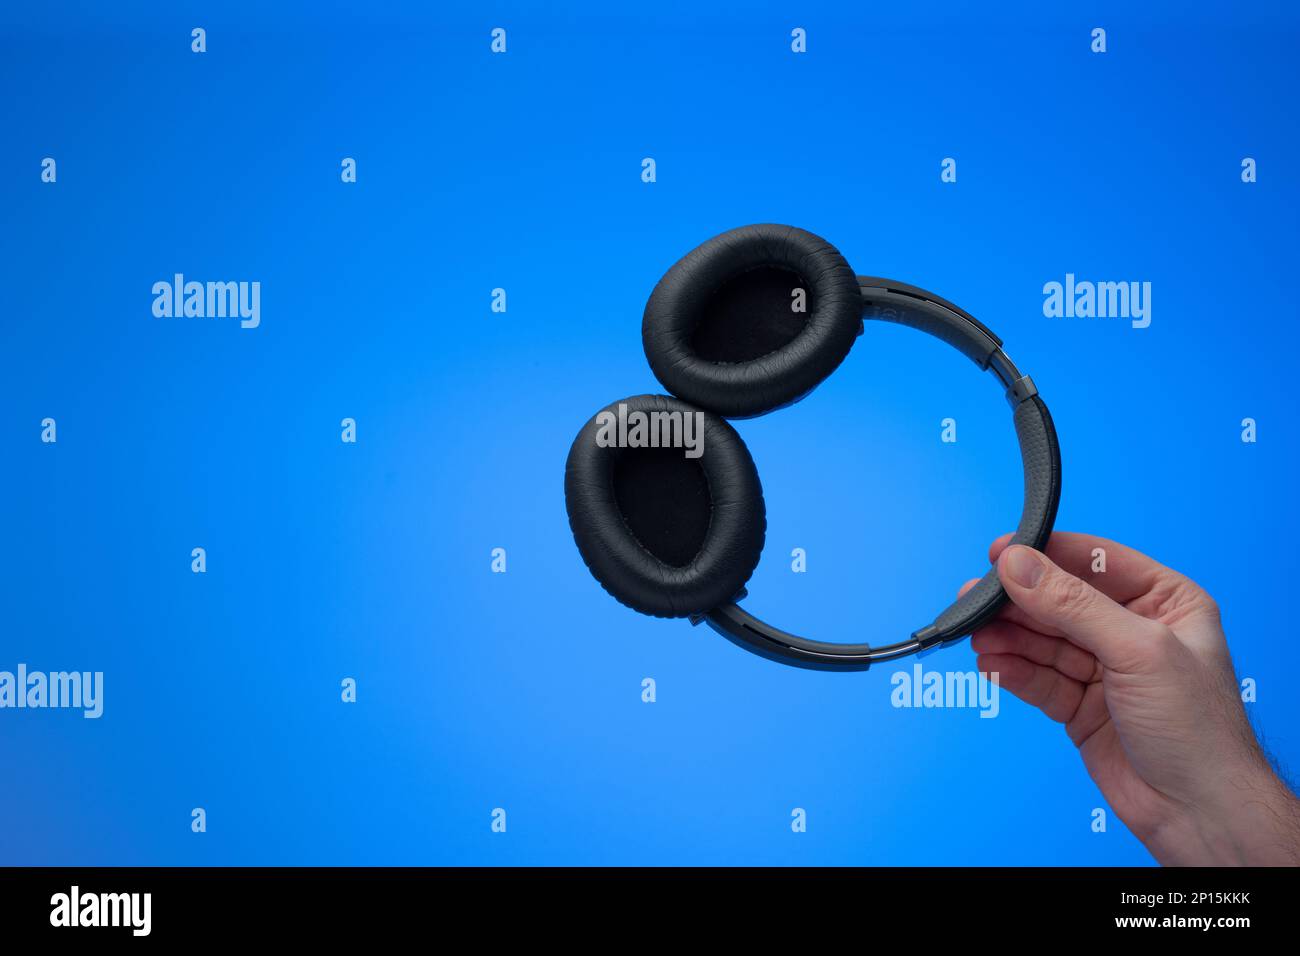 Generic wireless over the ear headphone held in hand by Caucasian male hand. Close up studio shot, isolated on blue background. Stock Photo